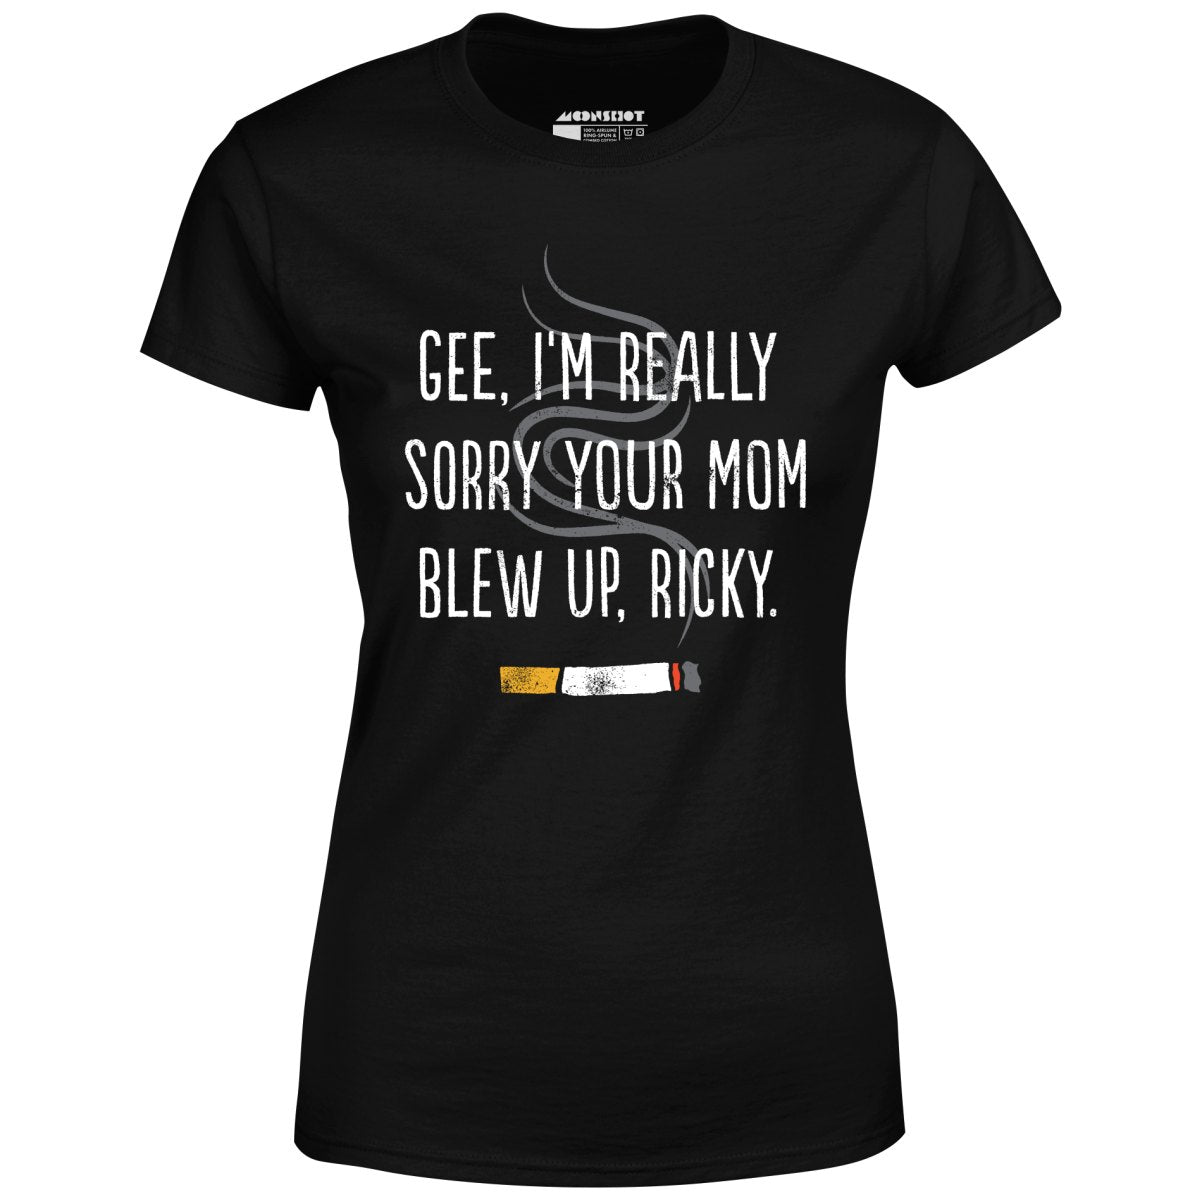 Gee, I'm Really Sorry Your Mom Blew Up, Ricky - Women's T-Shirt